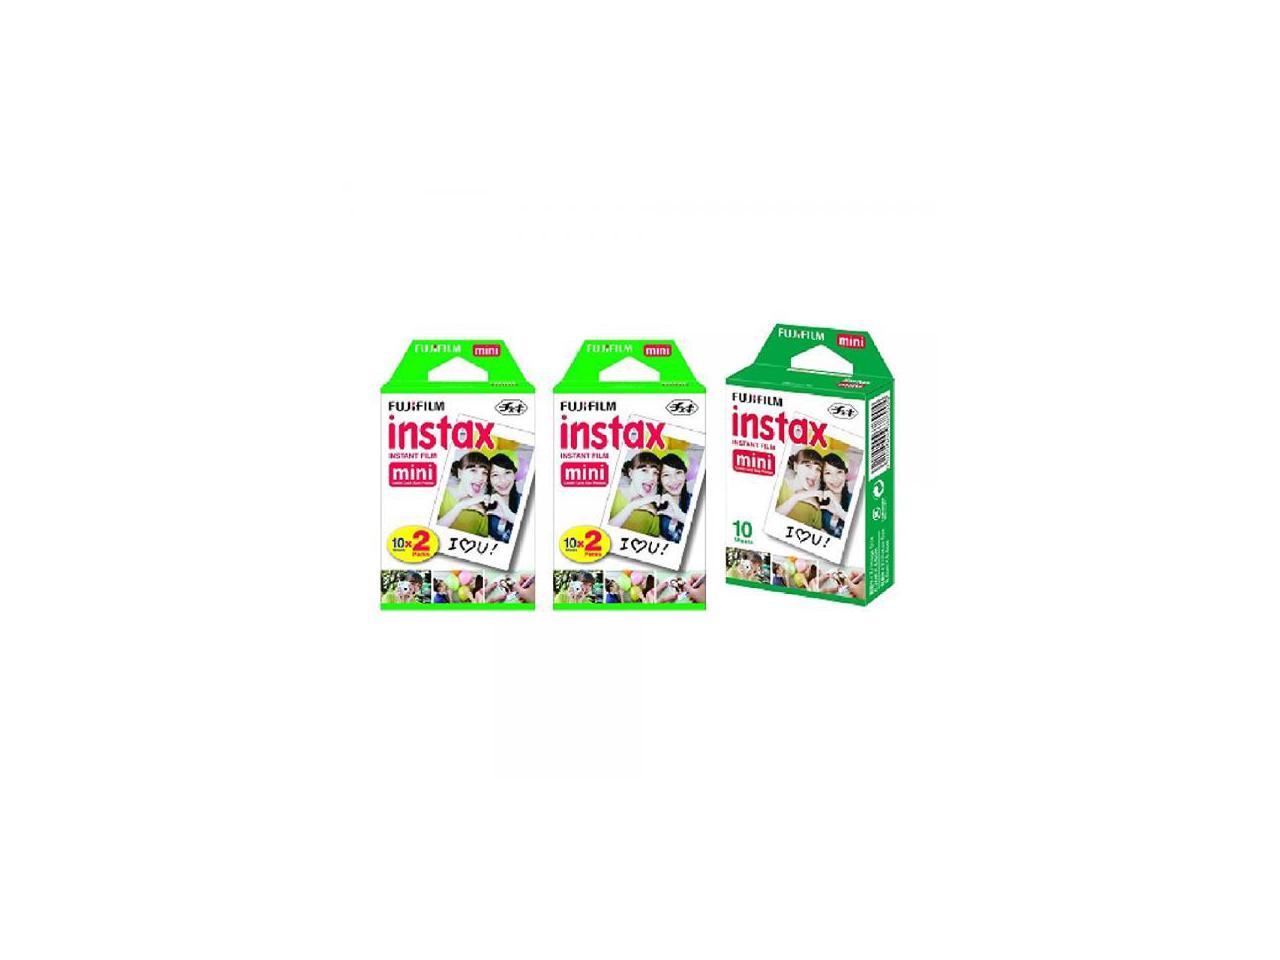 Fujifilm Instax Mini Instant Film, 5 Pack BUNDLE Includes Qty 2 Instax Mini Twin 10 Sheets x 2 packs = 40 Sheets + Instax Mini Single 10 Sheets: Total 50 Pictures